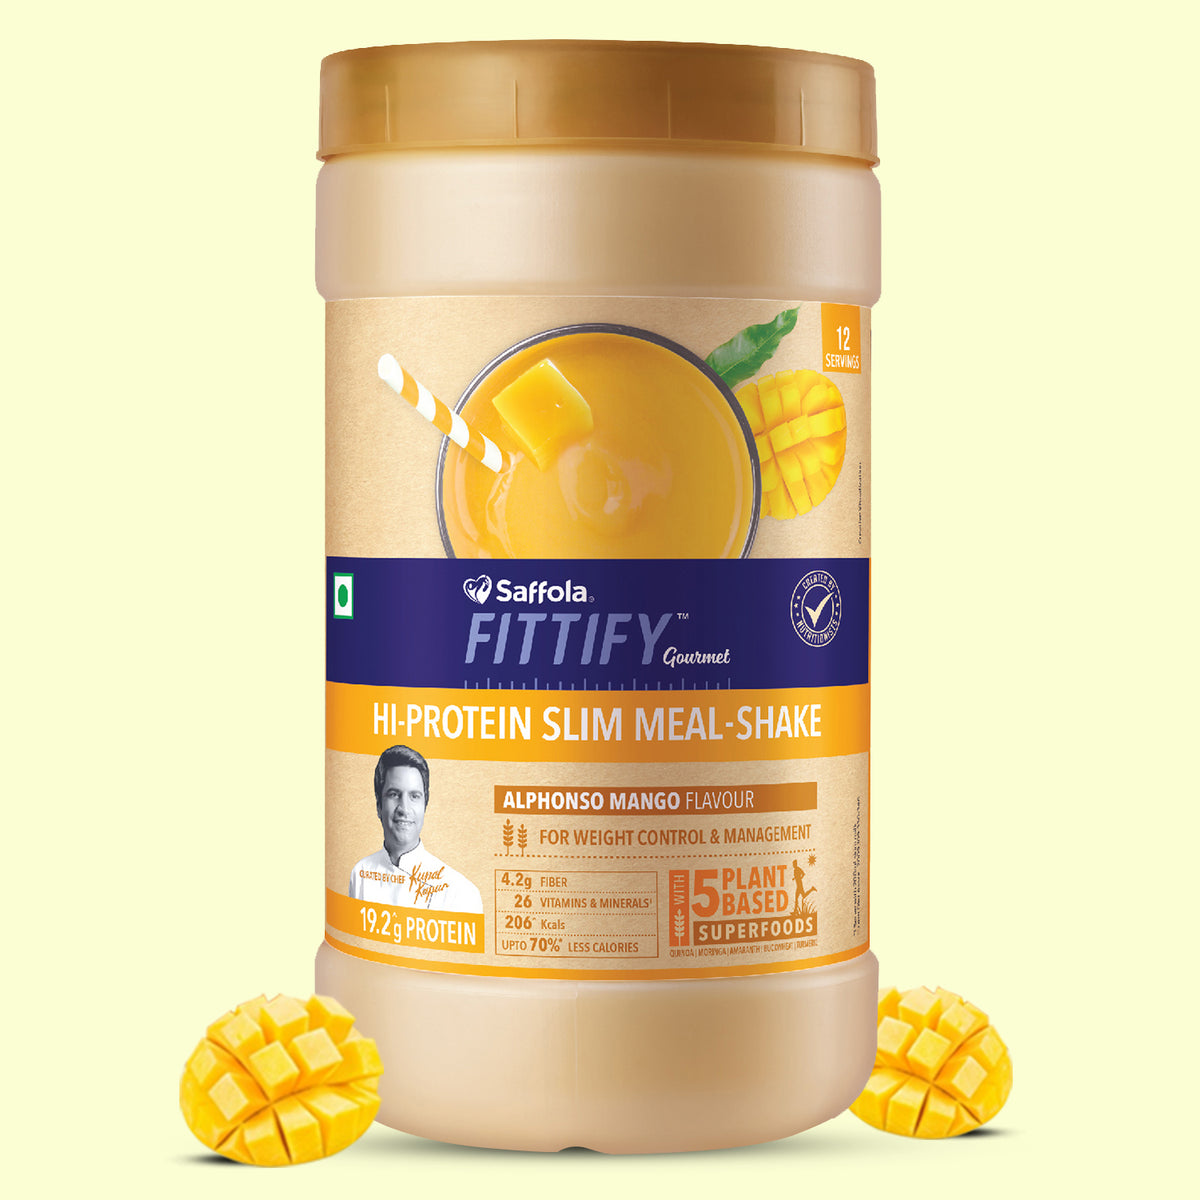 Saffola Fittify Hi-Protein Slim Meal Shake - Alphonso Mango - Pack of 1 - 420g